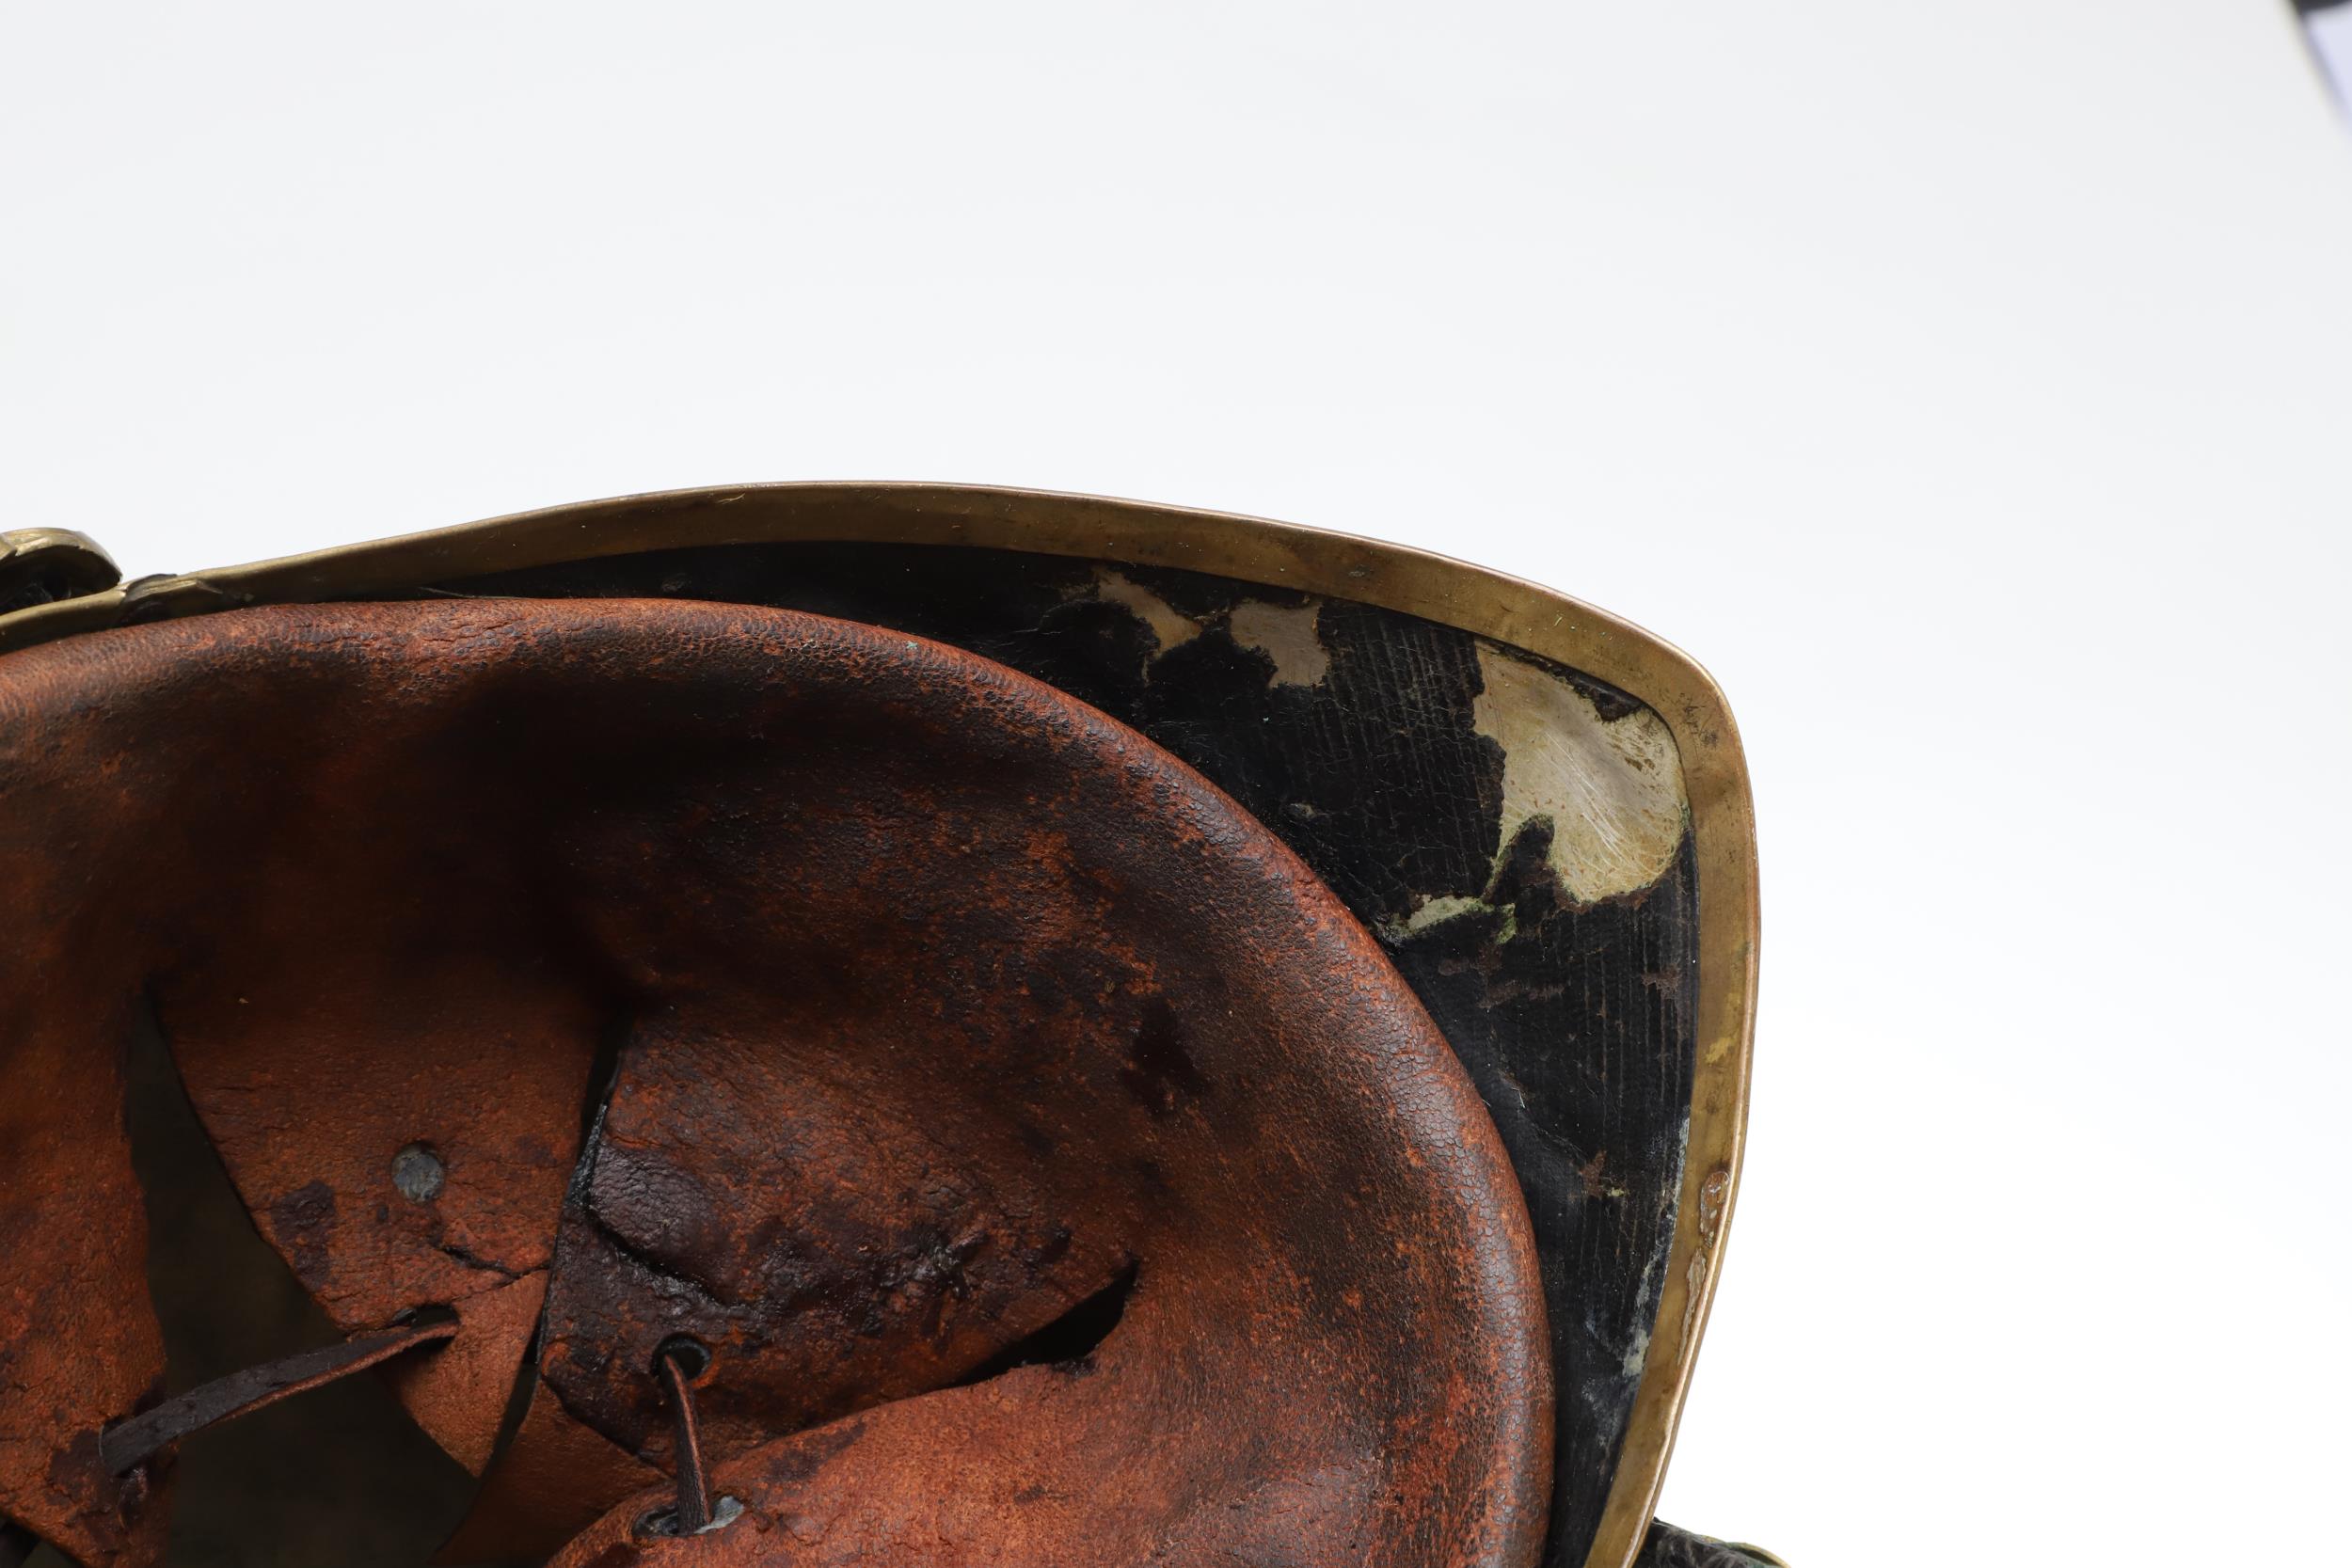 AN 1871 PATTERN HELMET WITH 1ST KING'S DRAGOON GUARDS HELMET PLATE. - Image 11 of 14